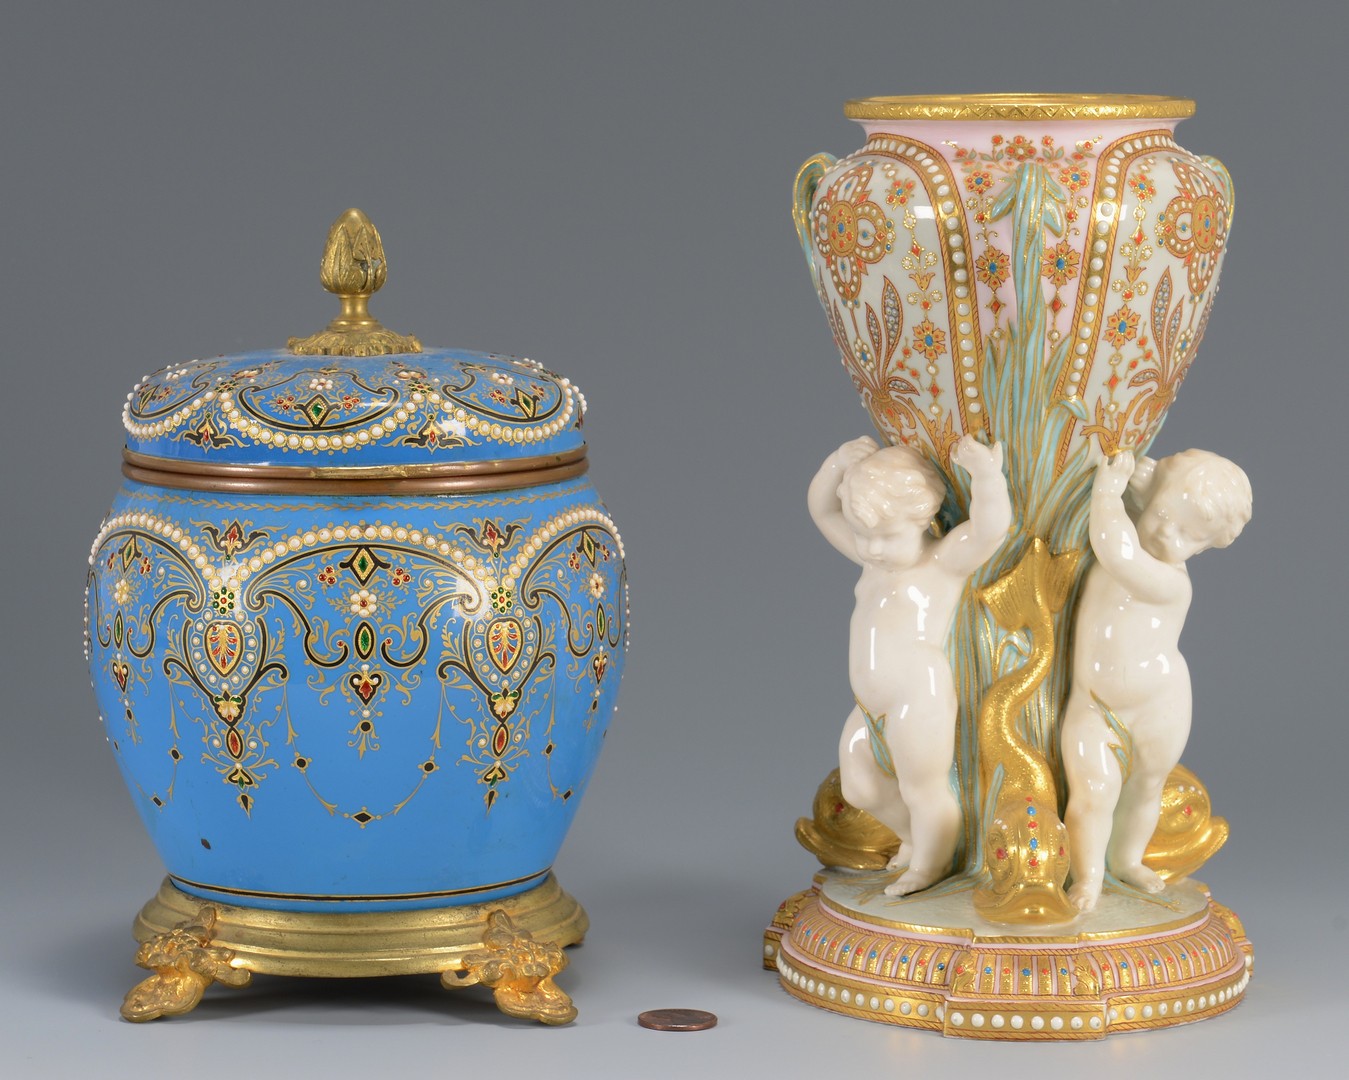 Lot 613: European jeweled porcelain and glass vase and jar